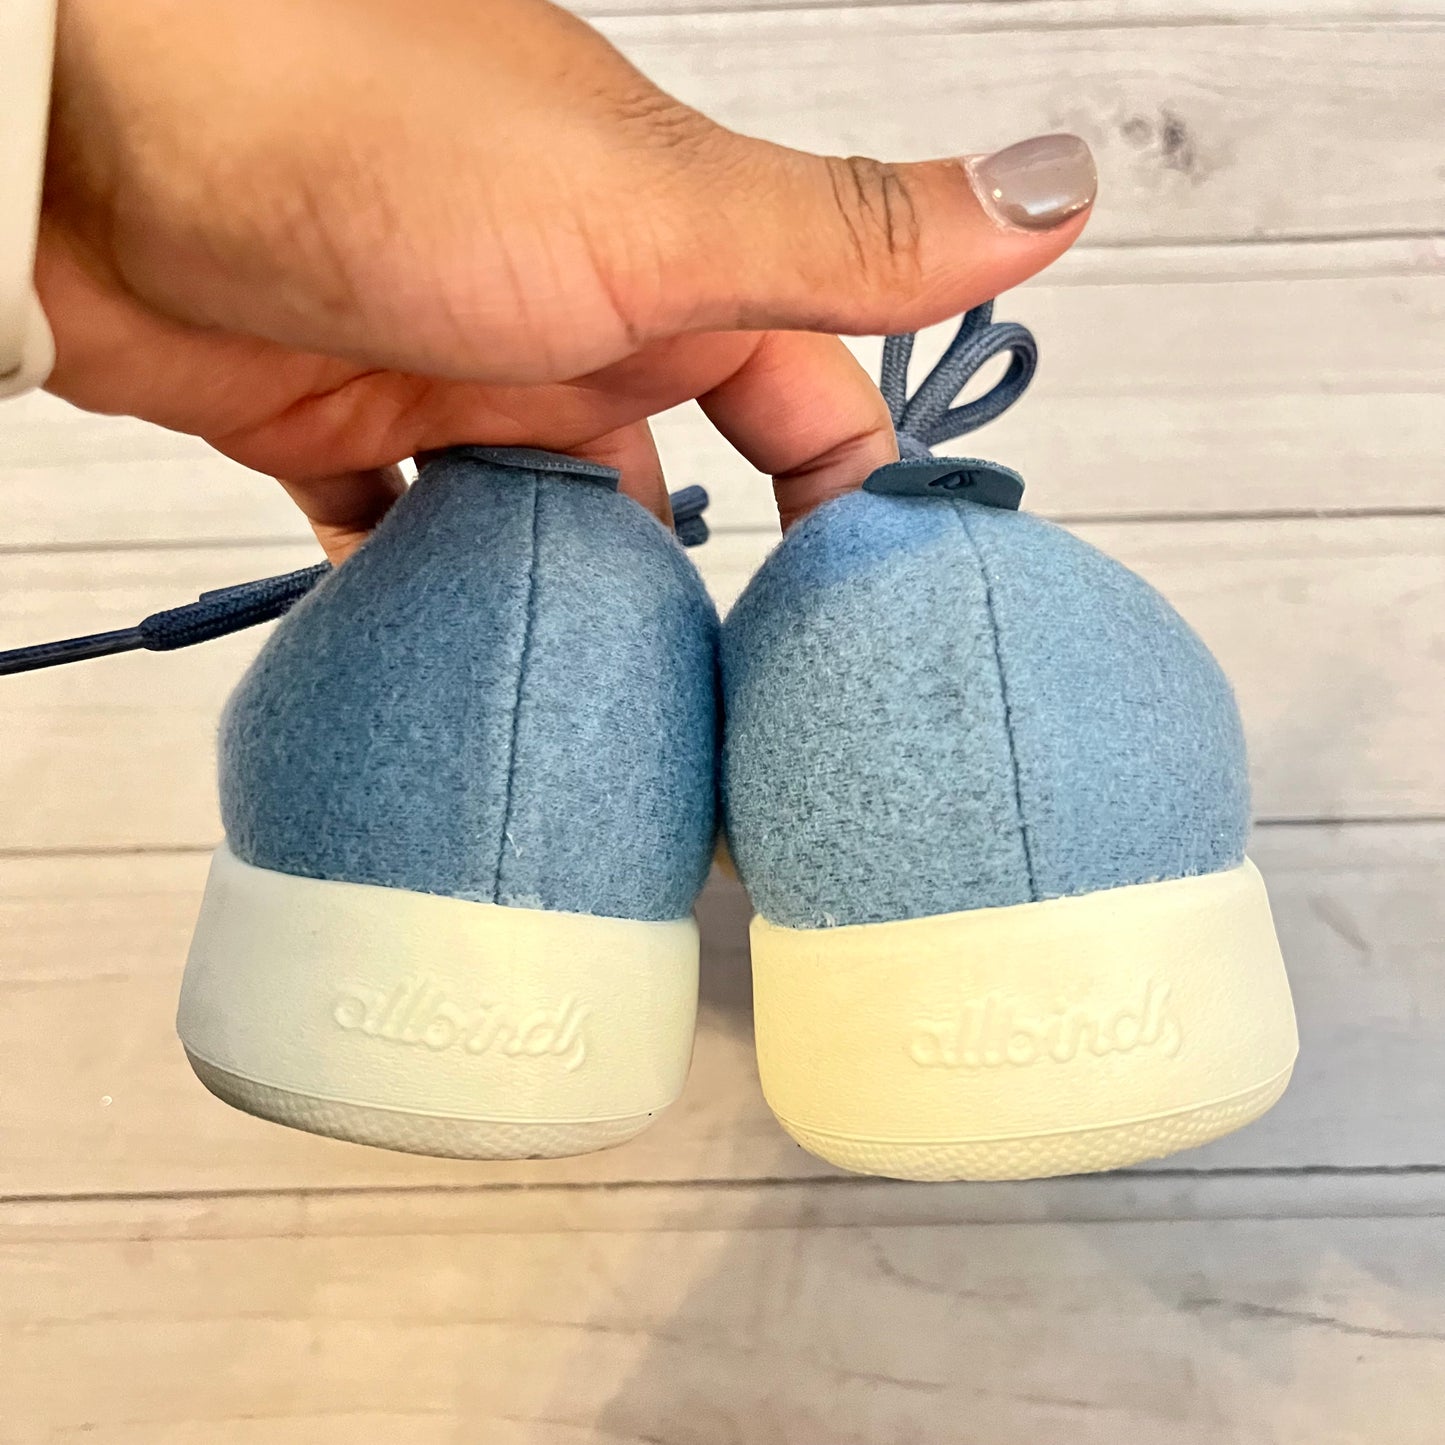 Shoes Sneakers By Allbirds Size: 8